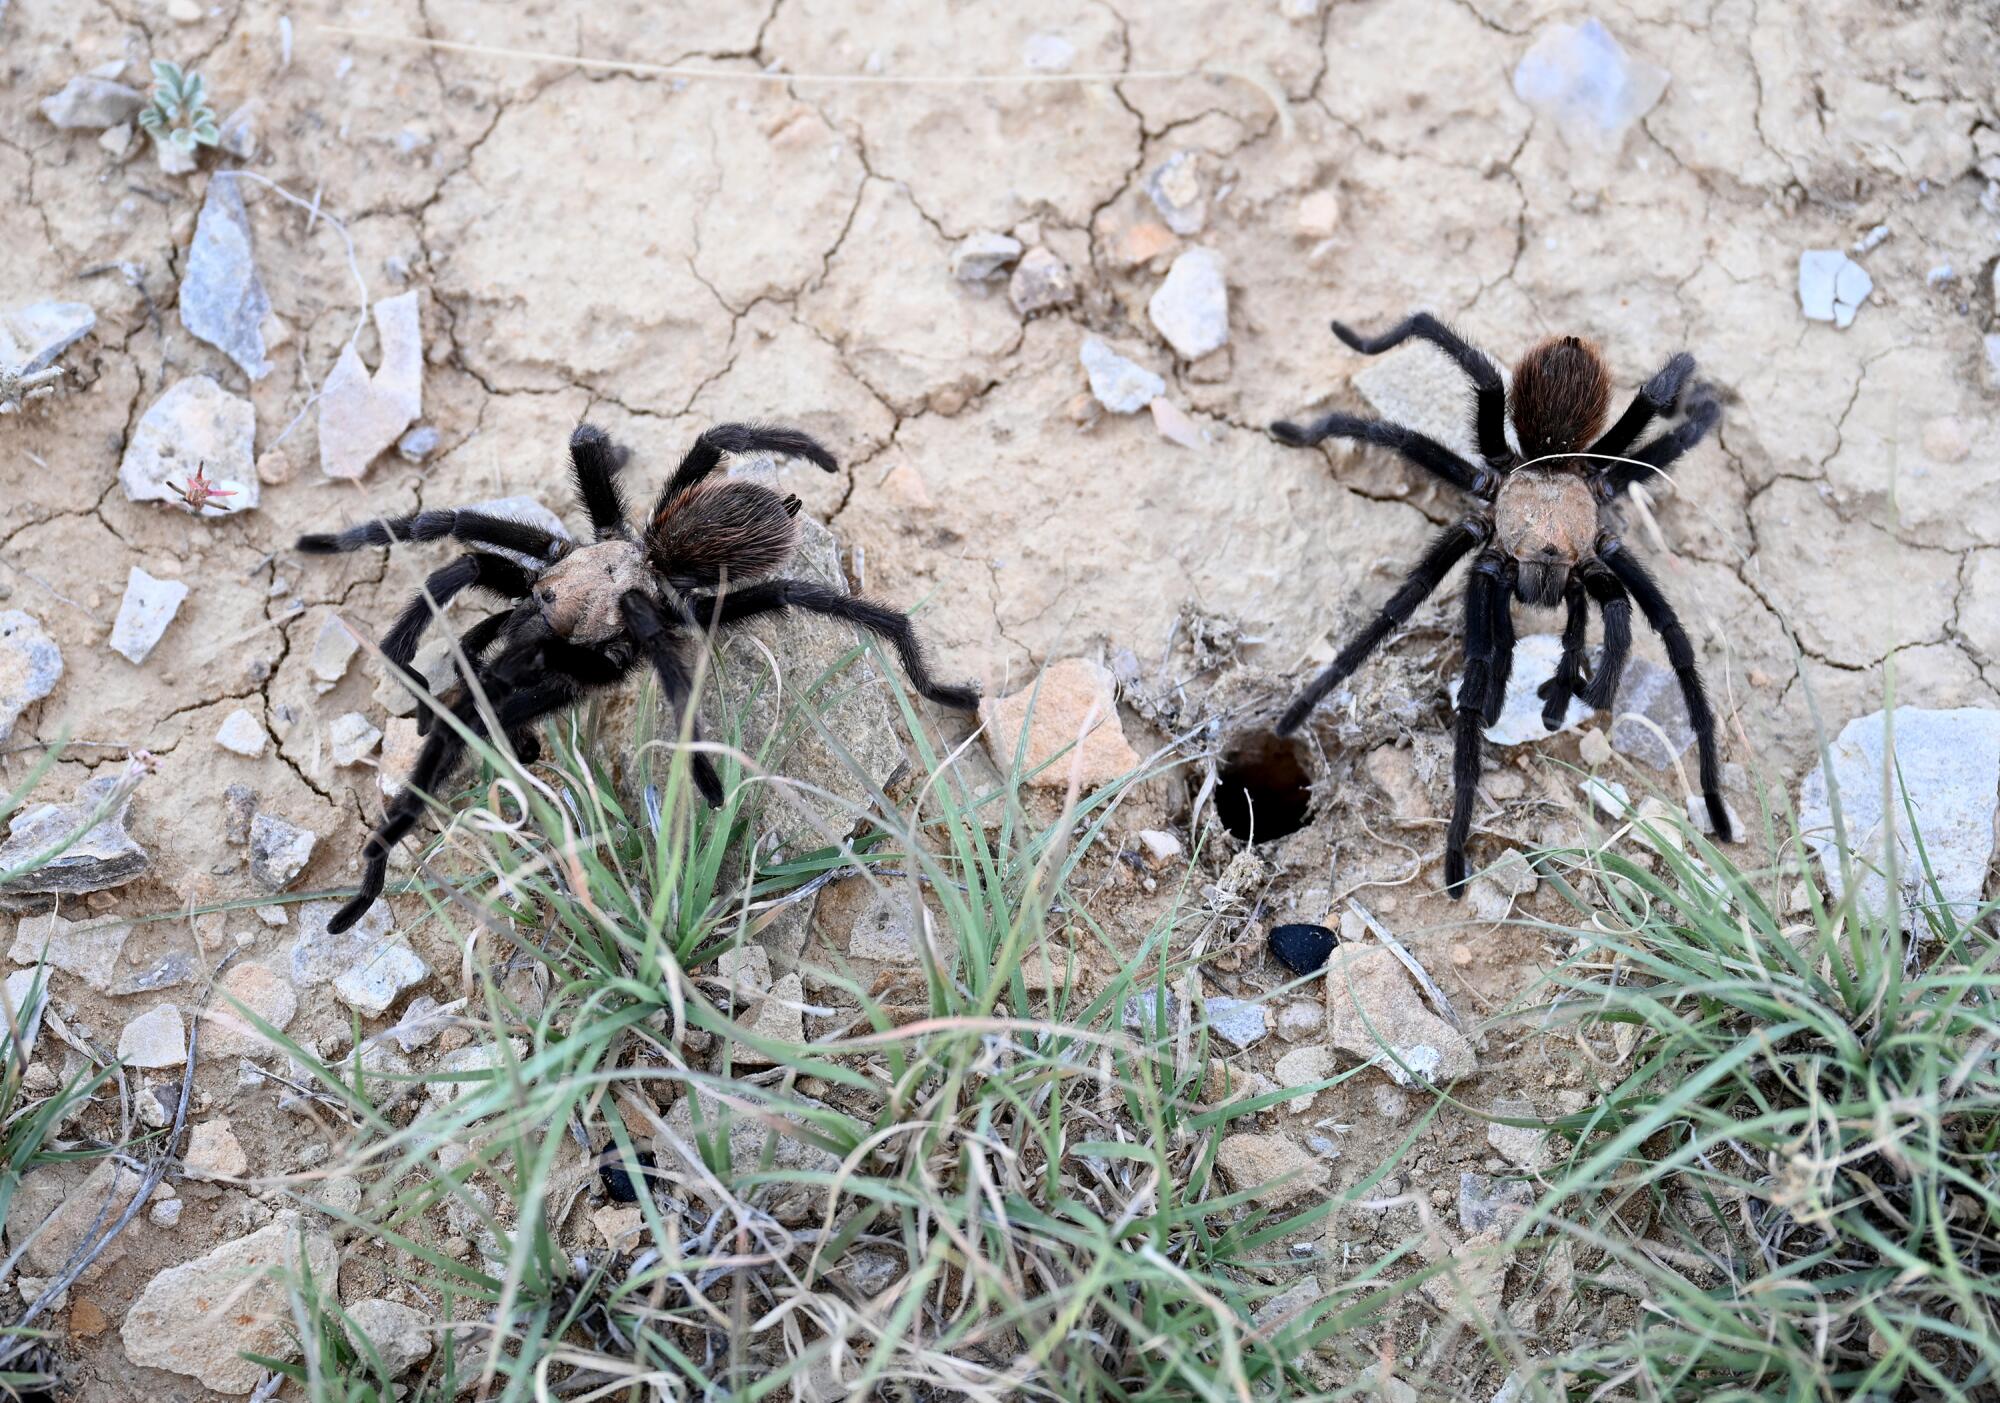 Spiders the size of your hand that can fly for miles? They're coming,  researchers say 